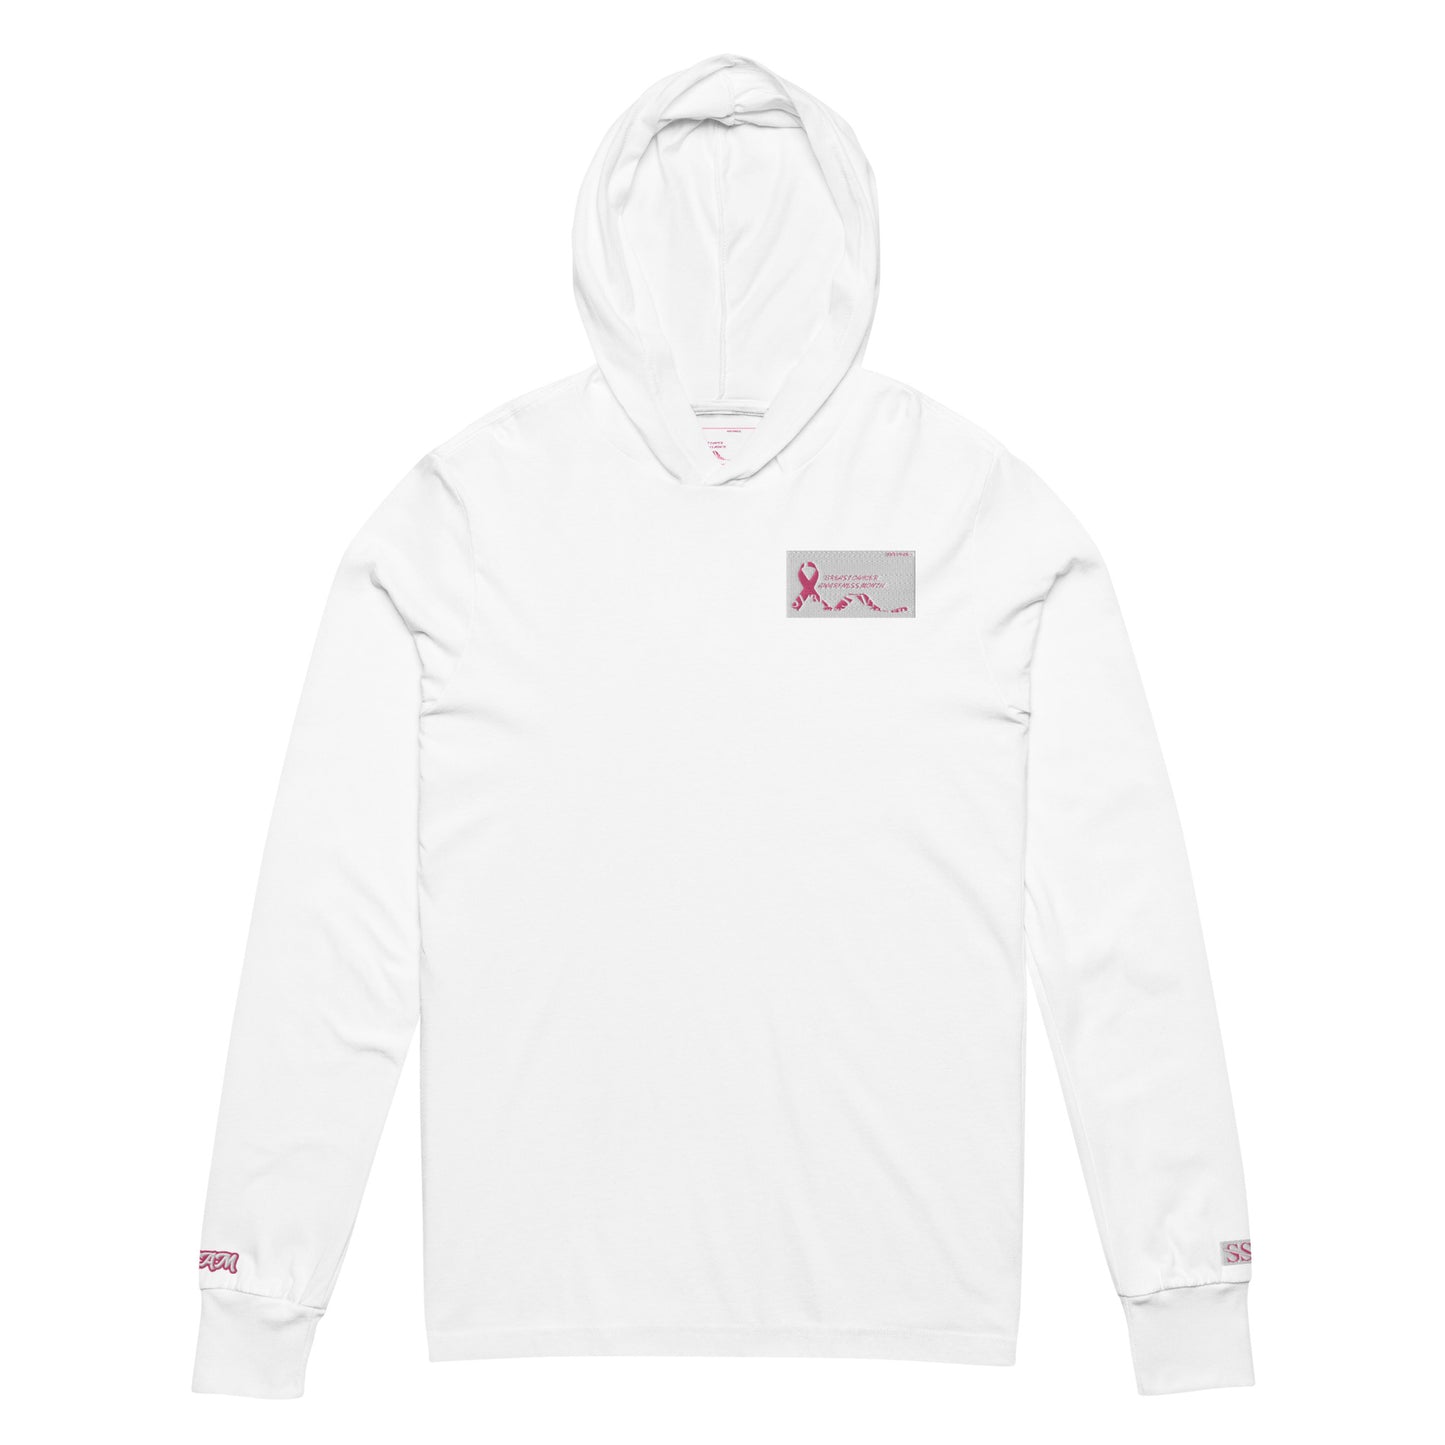 Breast Cancer Awareness Month Hooded Long-Sleeve Tee